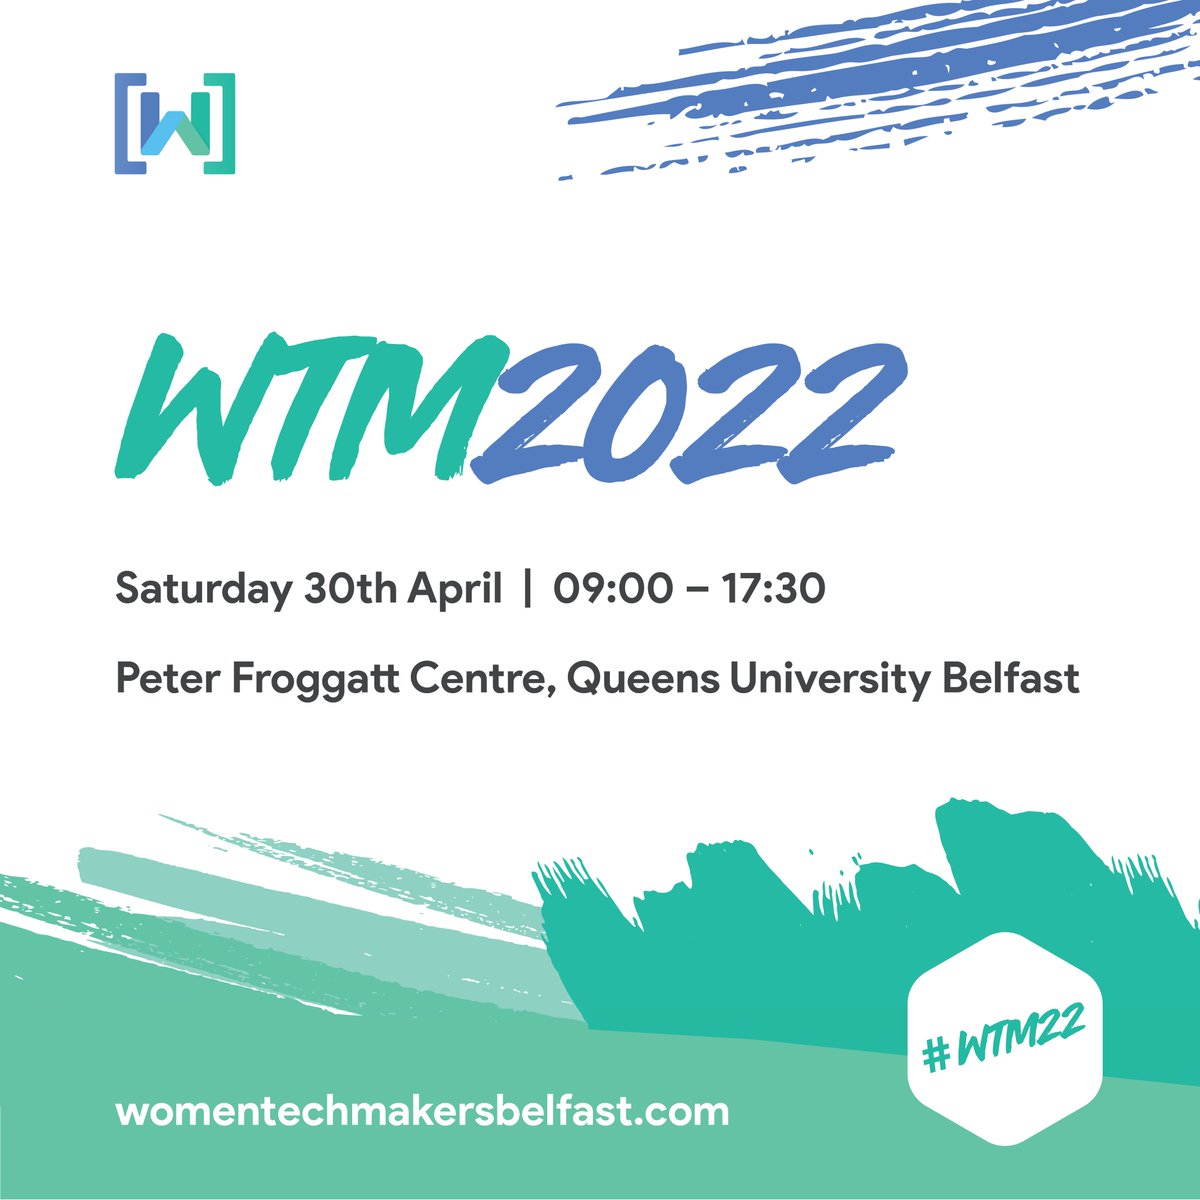 📢The Women TechMakers Belfast 2022 Conference agenda is LIVE! We have an exciting day planned with talks about #AI #Devops #DataScience #uxdesign #MachineLearning and much more!
Keep an eye out for more details on our speakers 👀
womentechmakersbelfast.com/schedule 
#womenintech #IWD2022